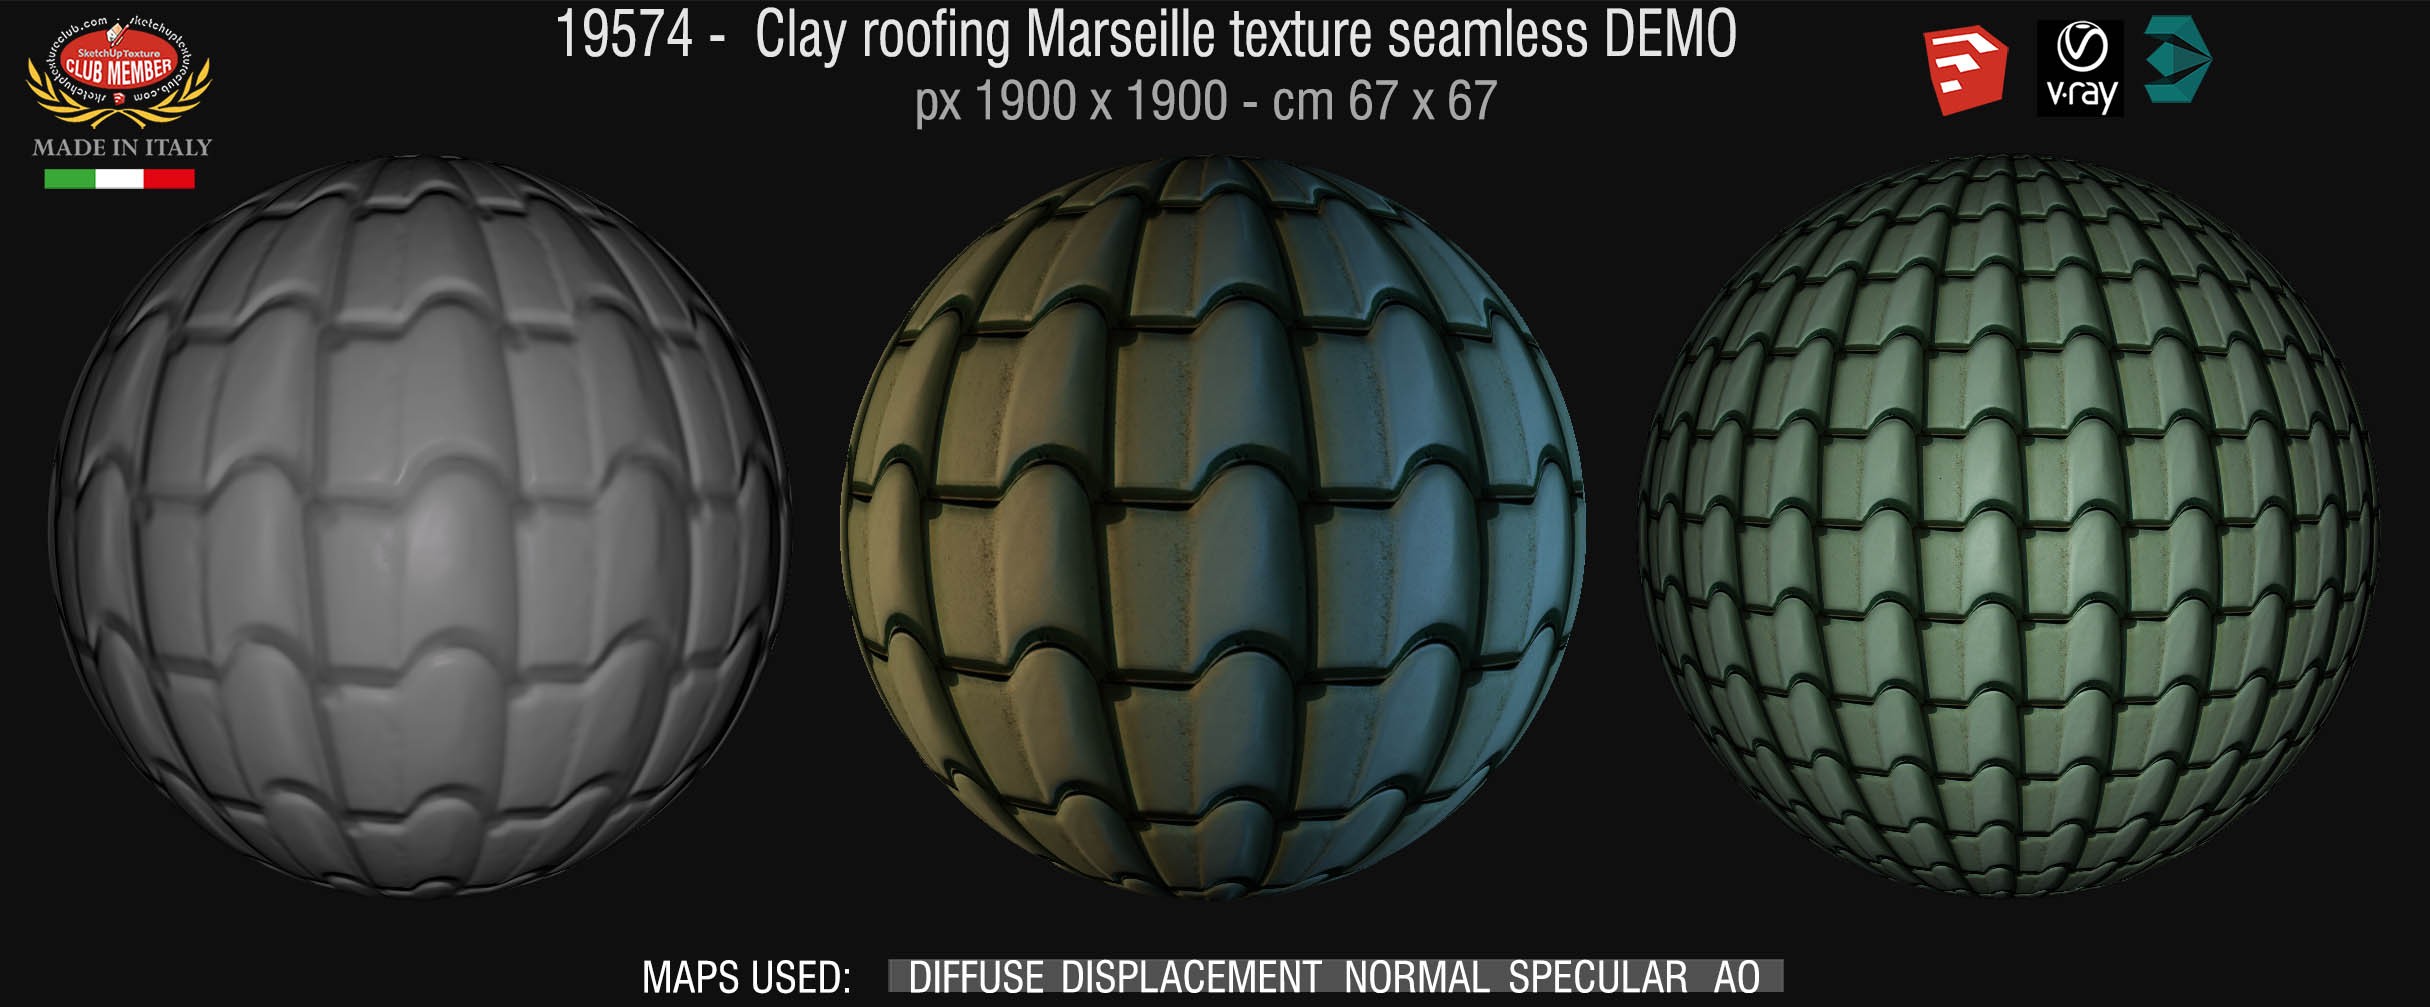 Clay roof texture seamless 19574